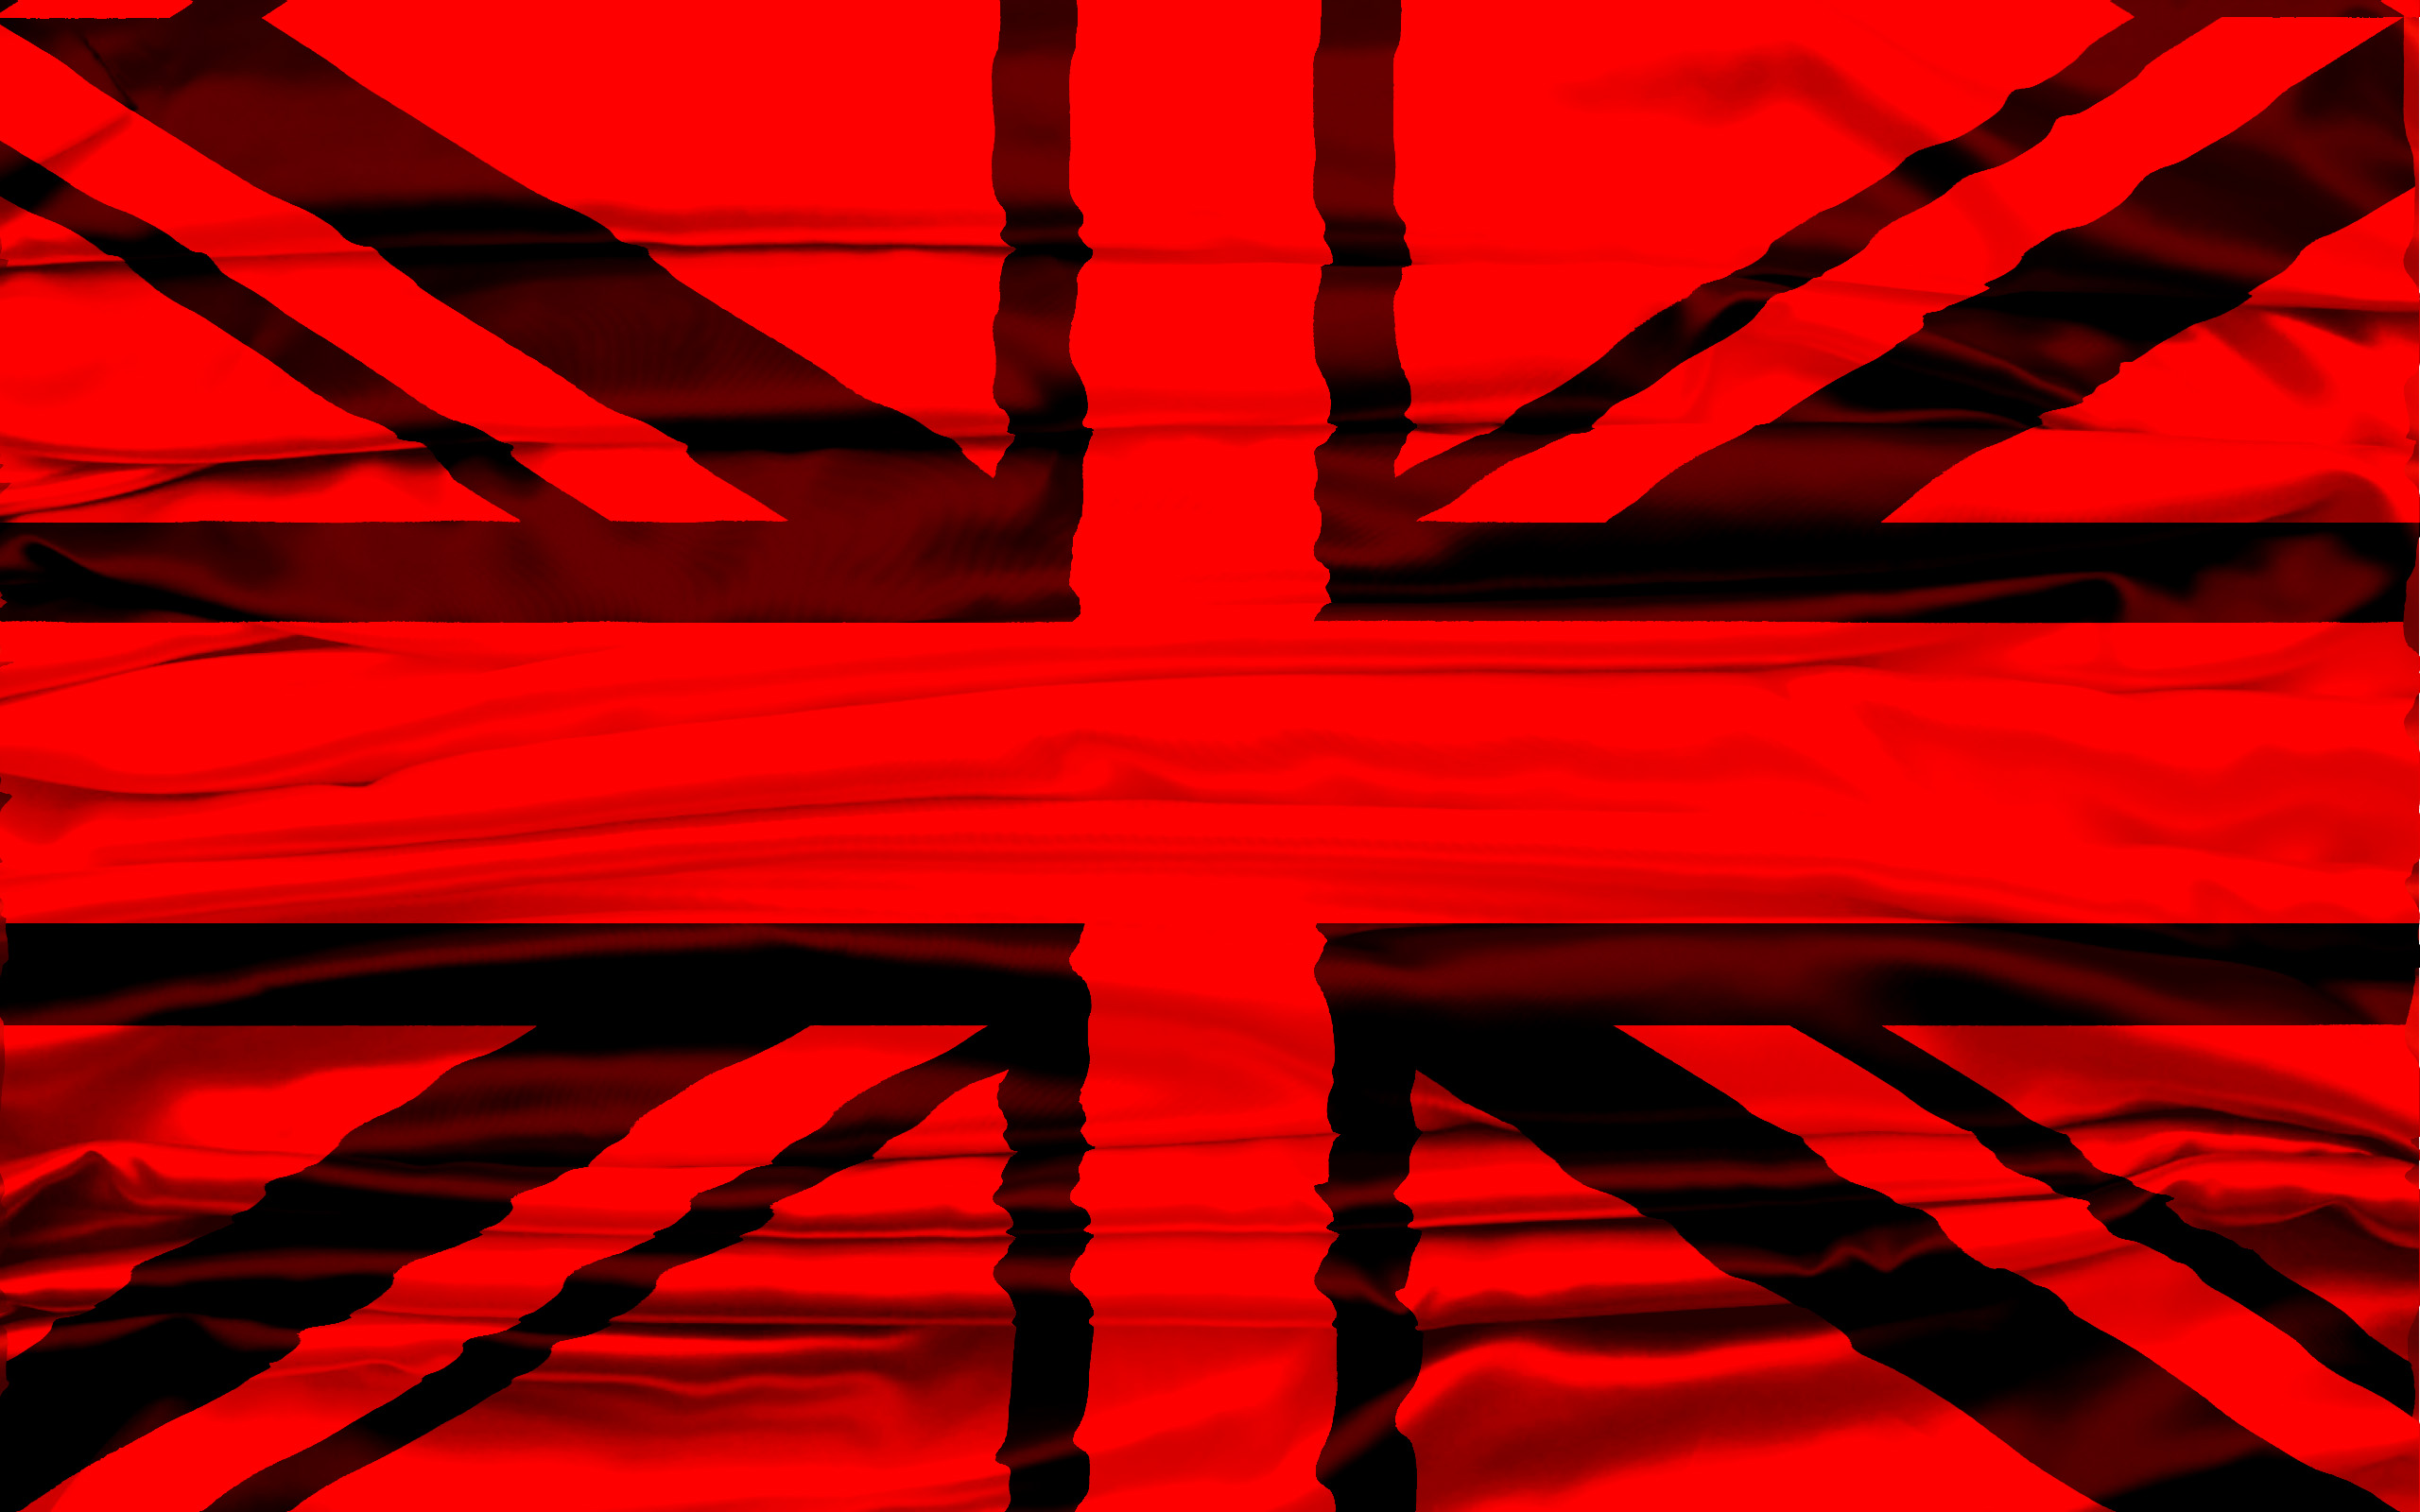 Wallpaper #180 Union Jack | Red and Black Wallpapers